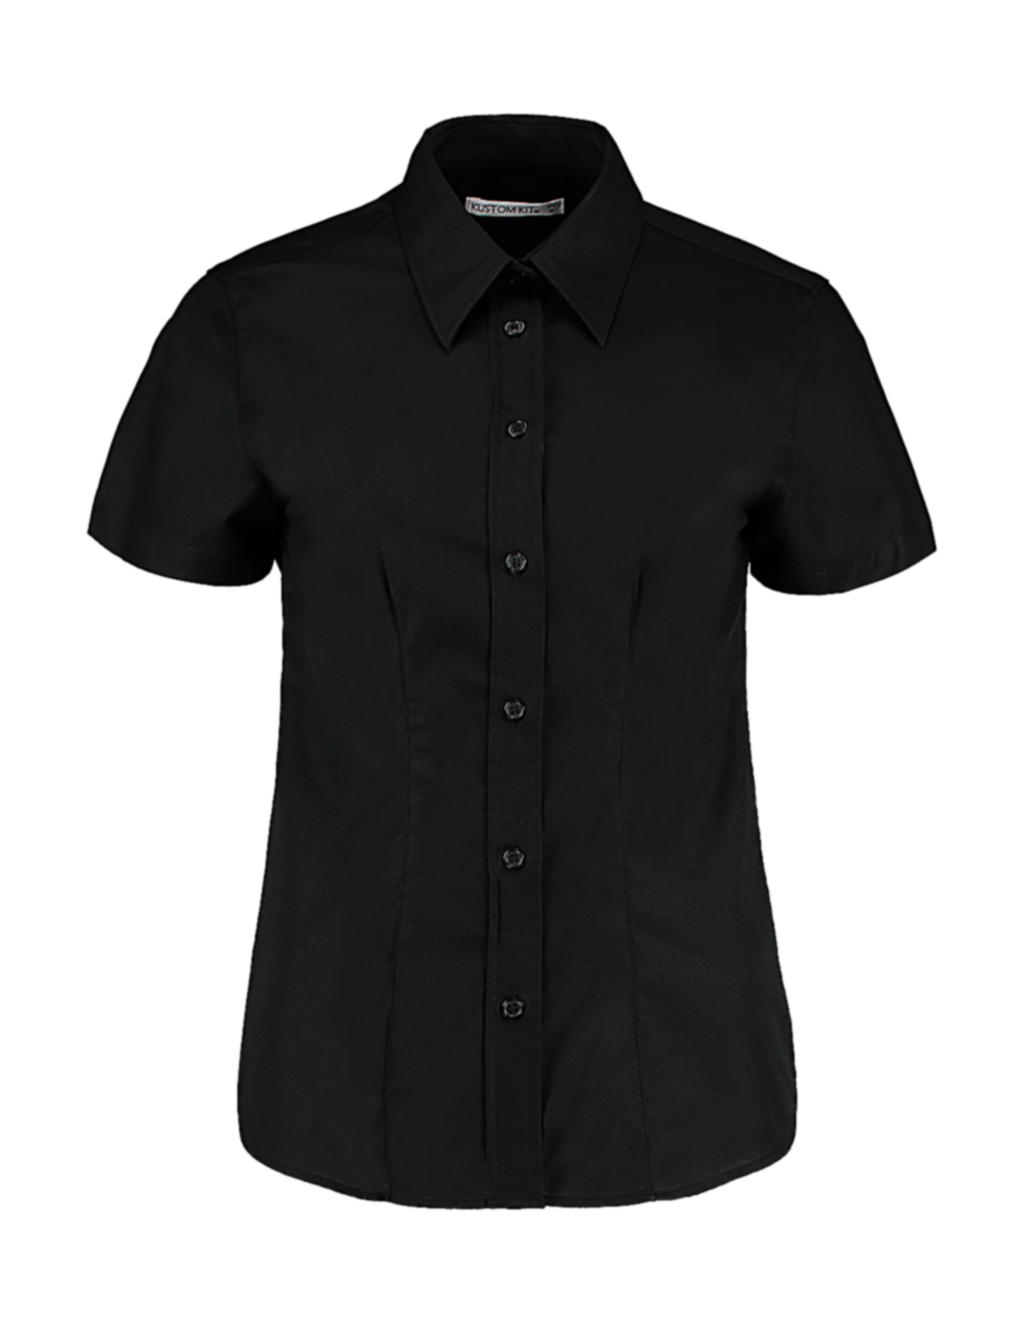  Womens Tailored Fit Workwear Oxford Shirt SSL in Farbe Black